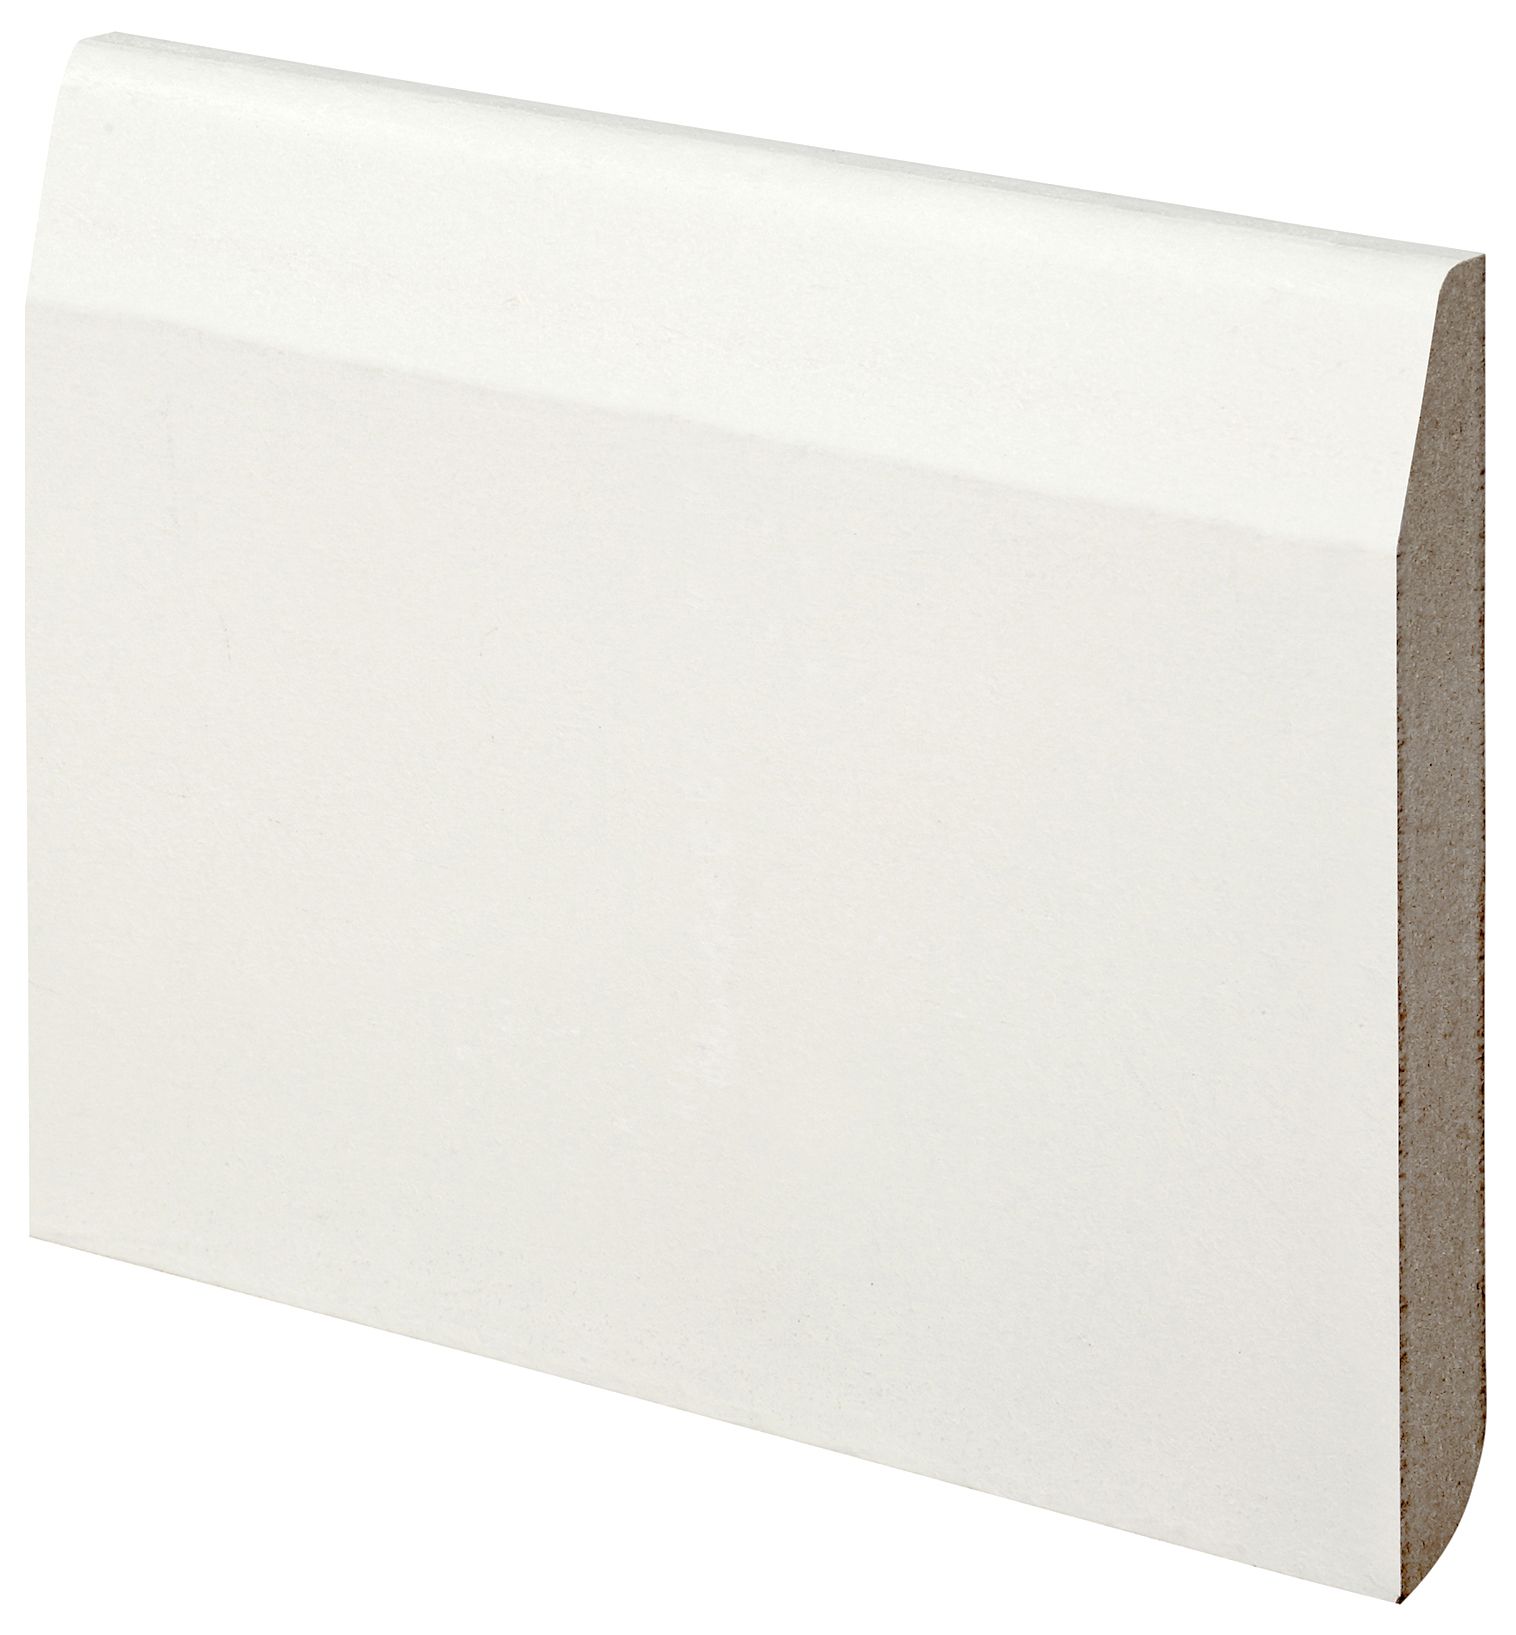 Wickes Dual Purpose Chamfered / Bullnose Primed MDF Skirting - 18 x 144 x 3660 mm